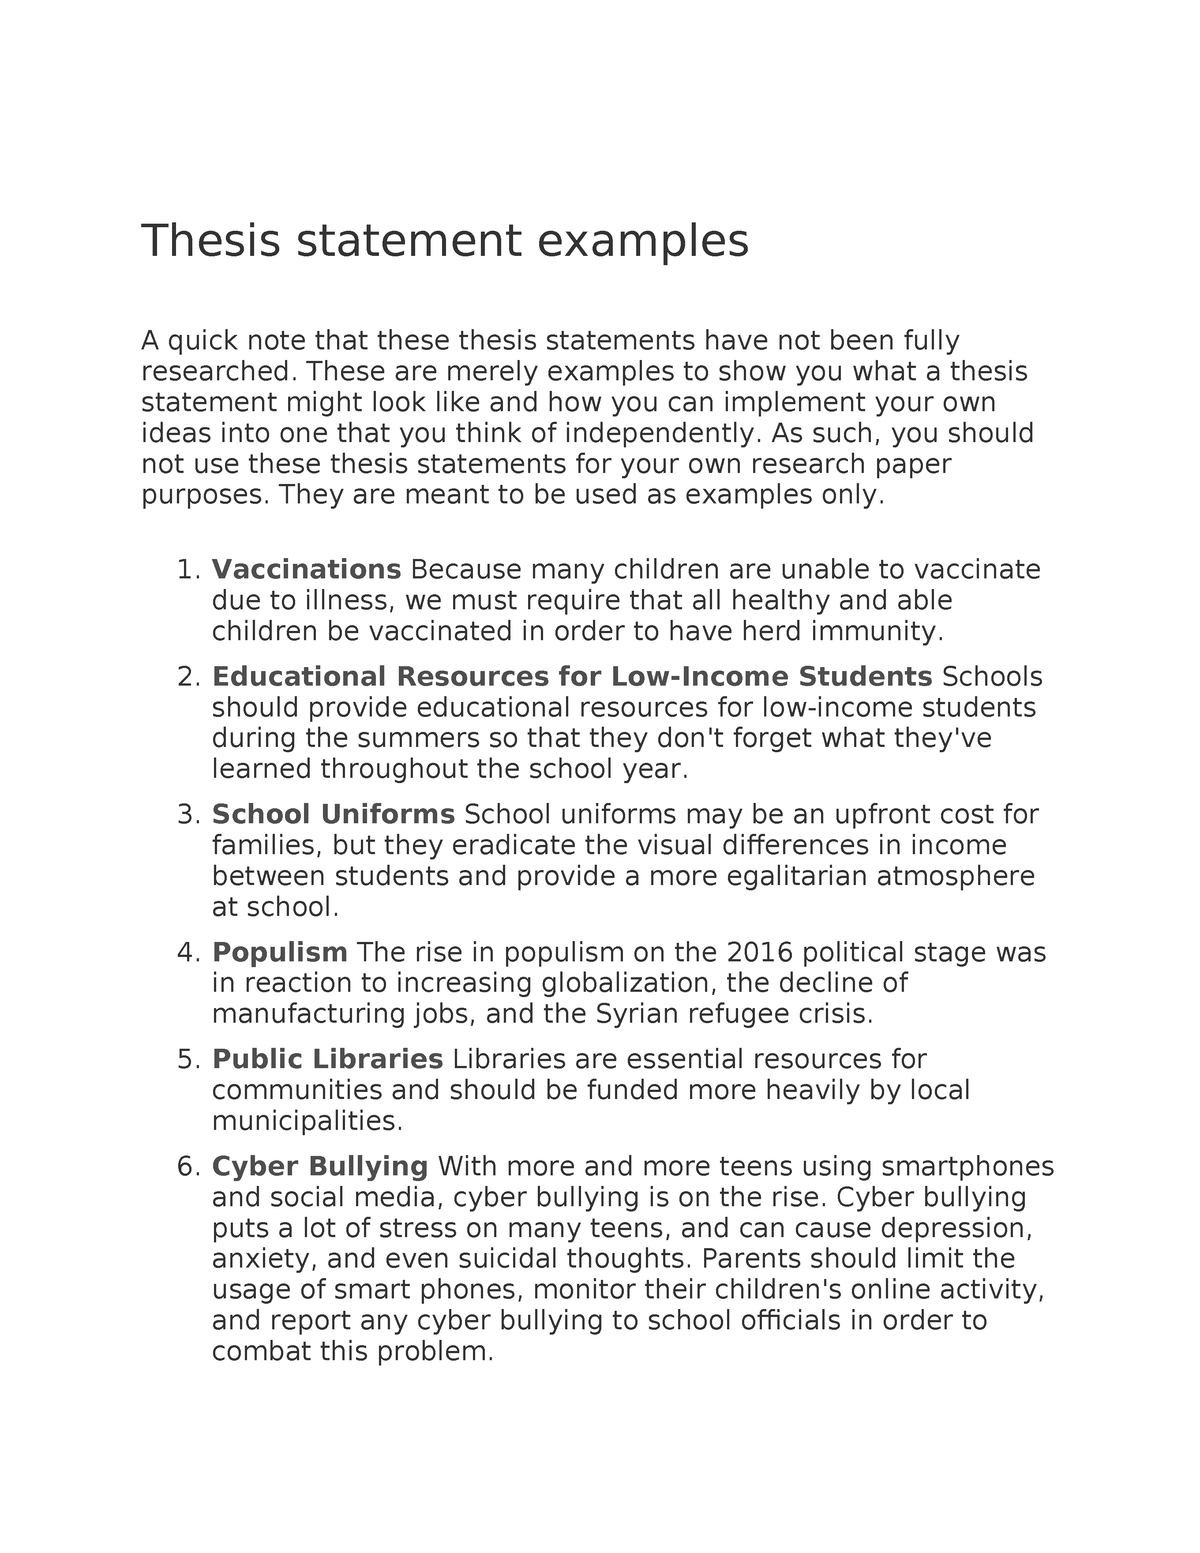 Thesis statement examples - These are merely examples to show you what ...